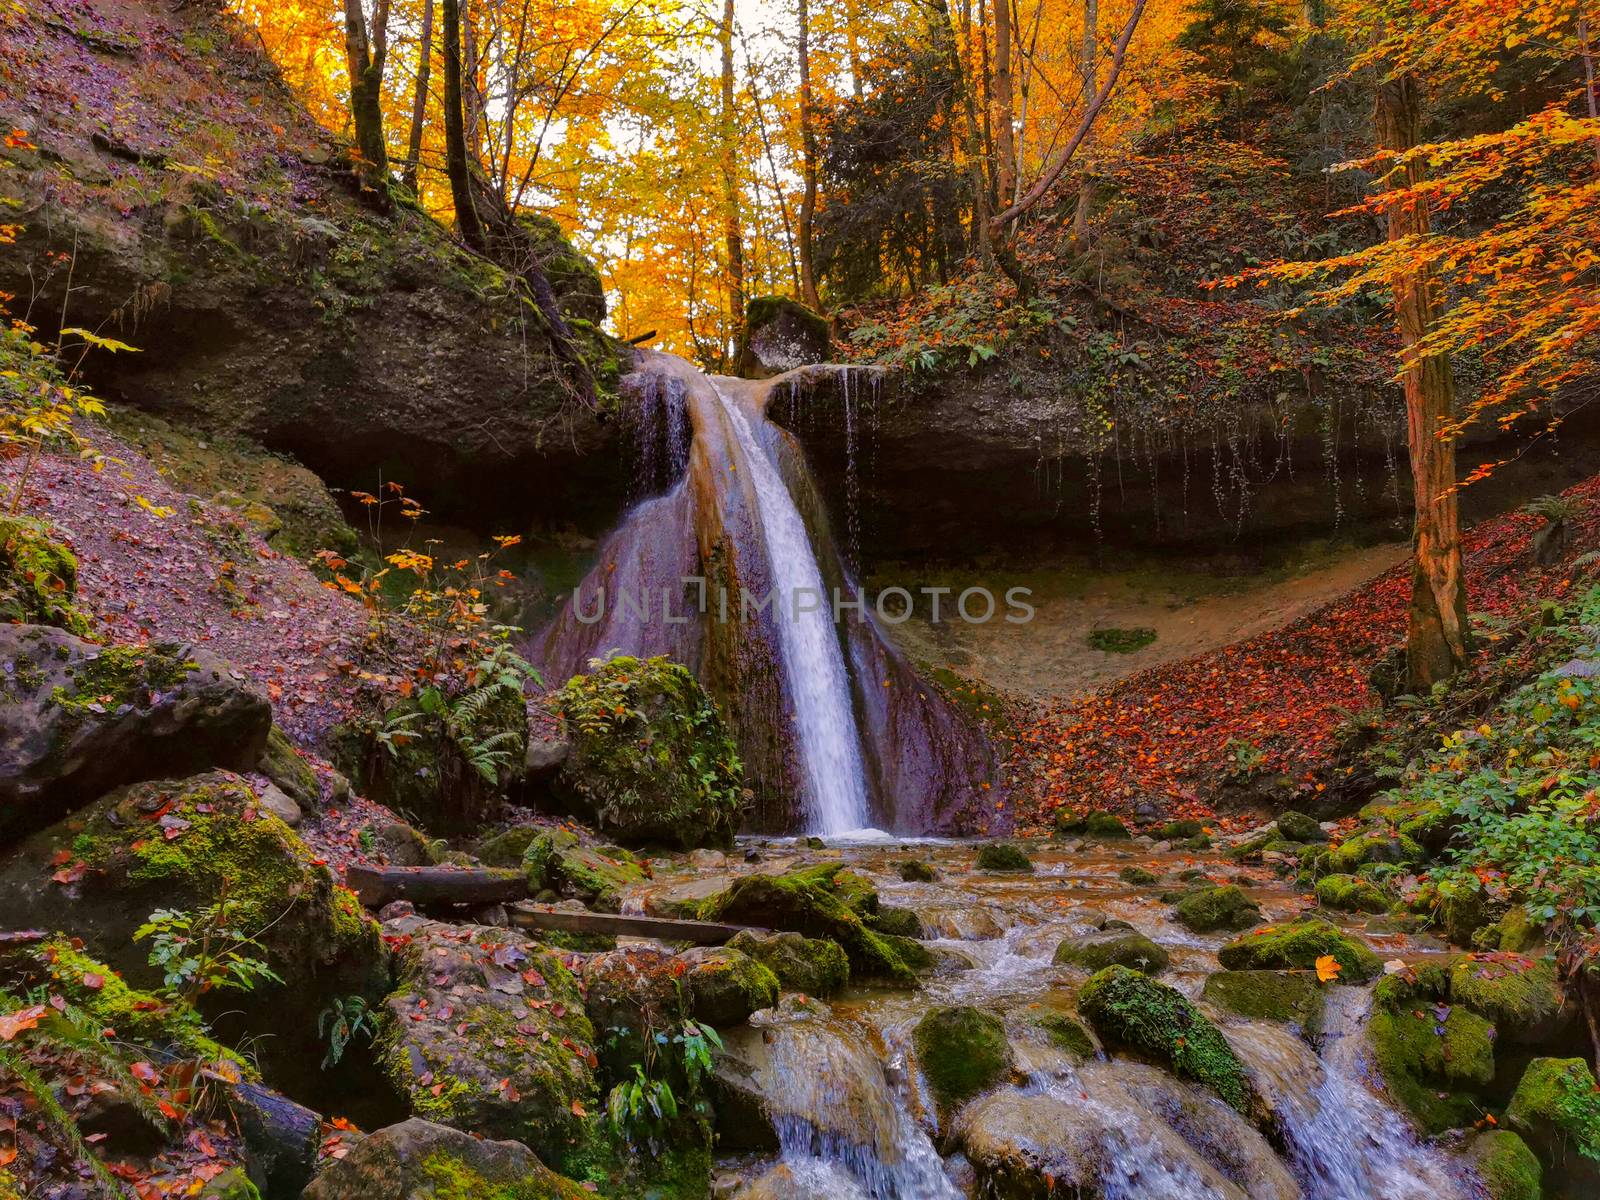 Waterfall in autumn with orange and yellow colors. Running clear, cold water in a forrest during autumn. by PeterHofstetter